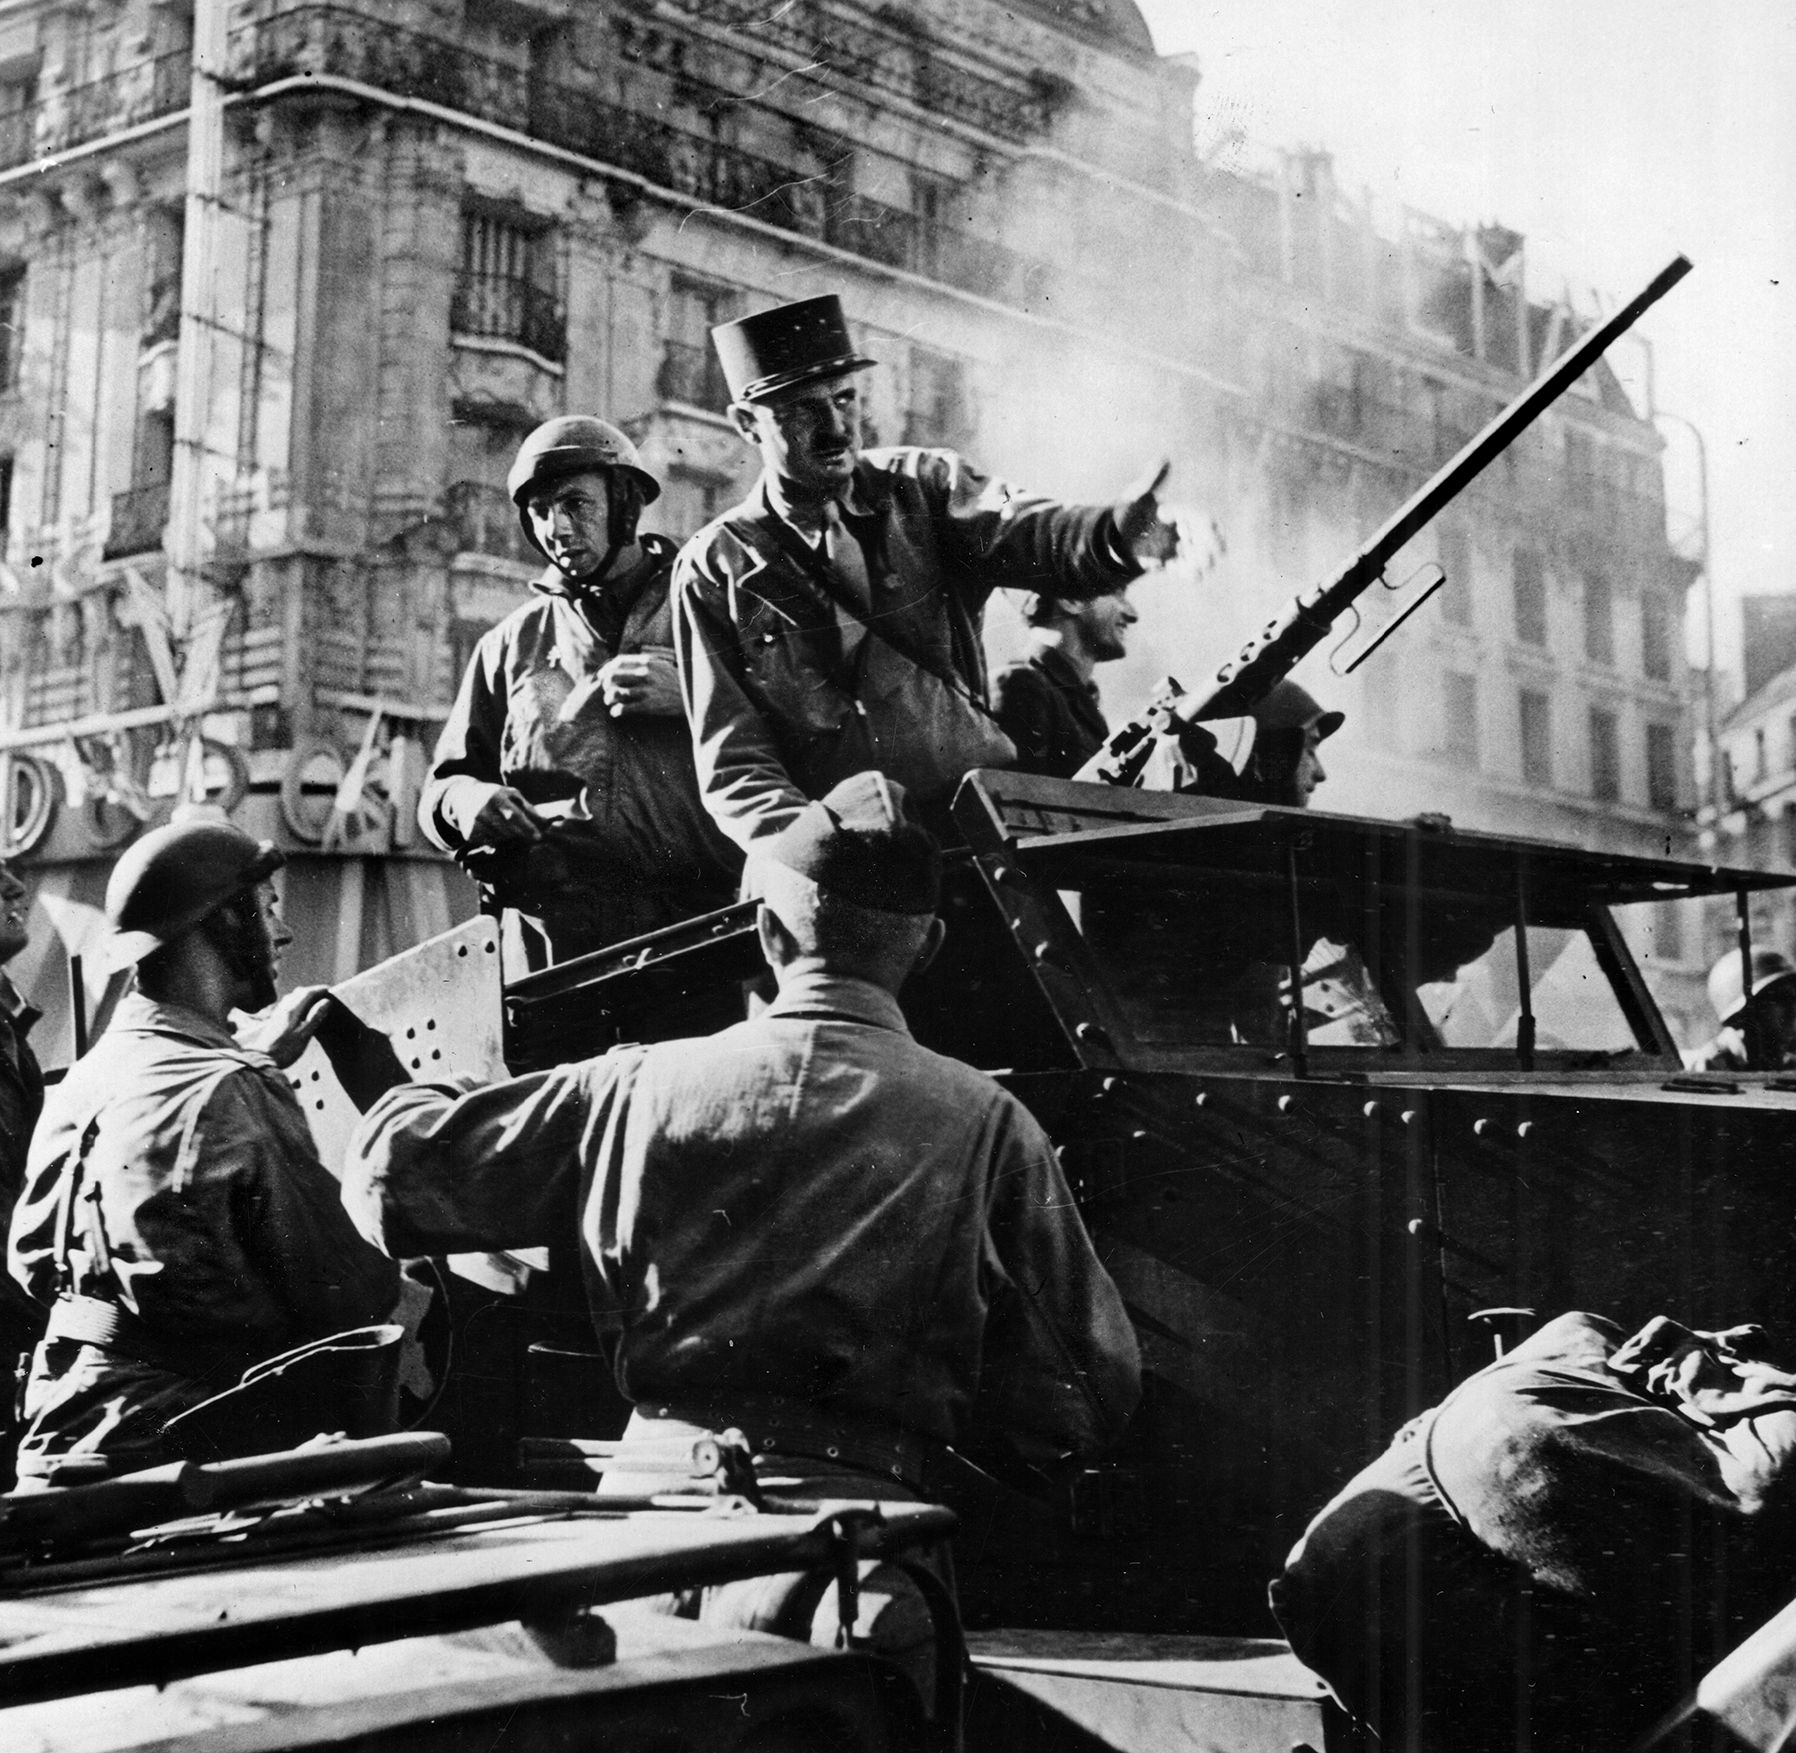 Oblivious to snipers and wearing his trademark kepi, Leclerc enters Paris on August 25, 1944, and issues orders from his halftrack on the Boulevard Montparnasse. 